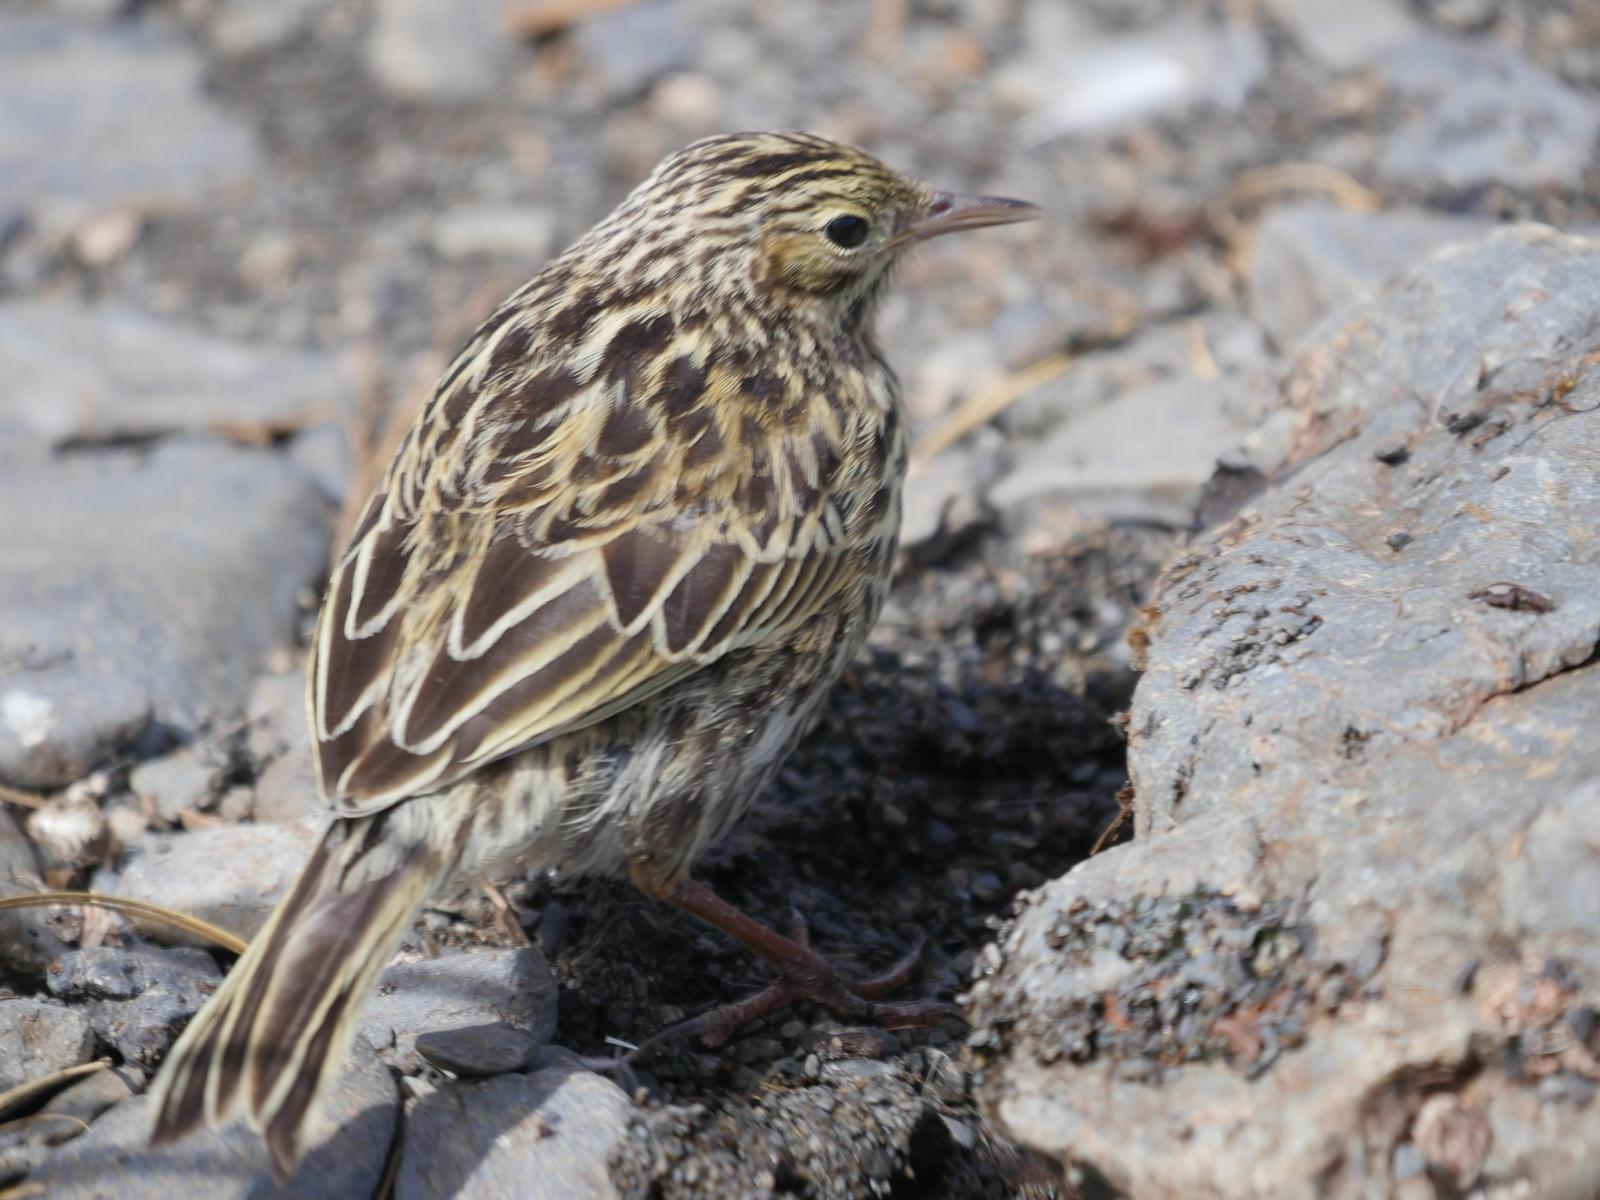 South Georgia Pipit Photo by Peter Lowe